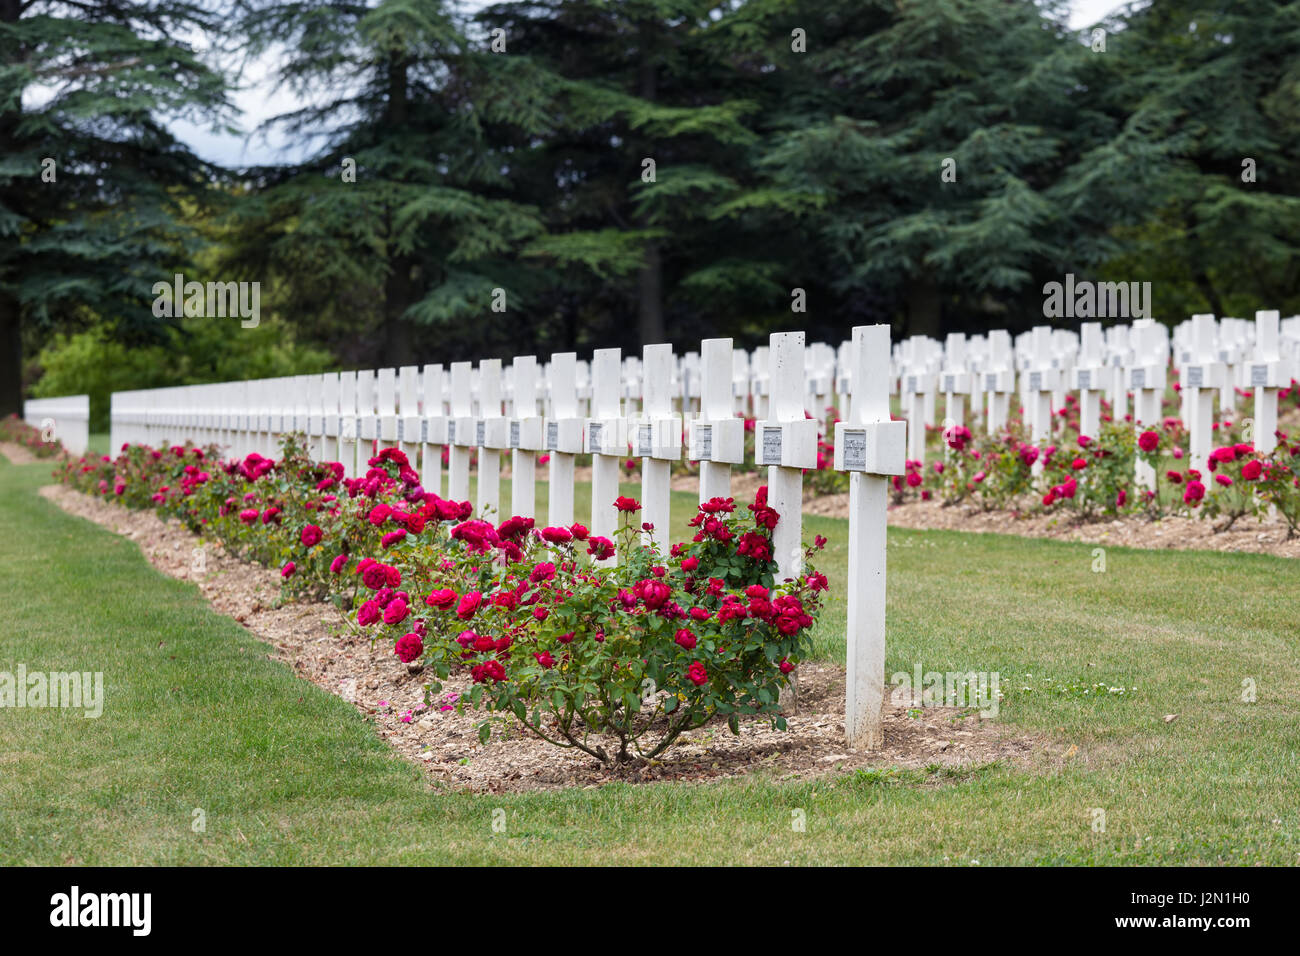 Cemetery for First World War One soldiers who died at Battle of Verdun Stock Photo